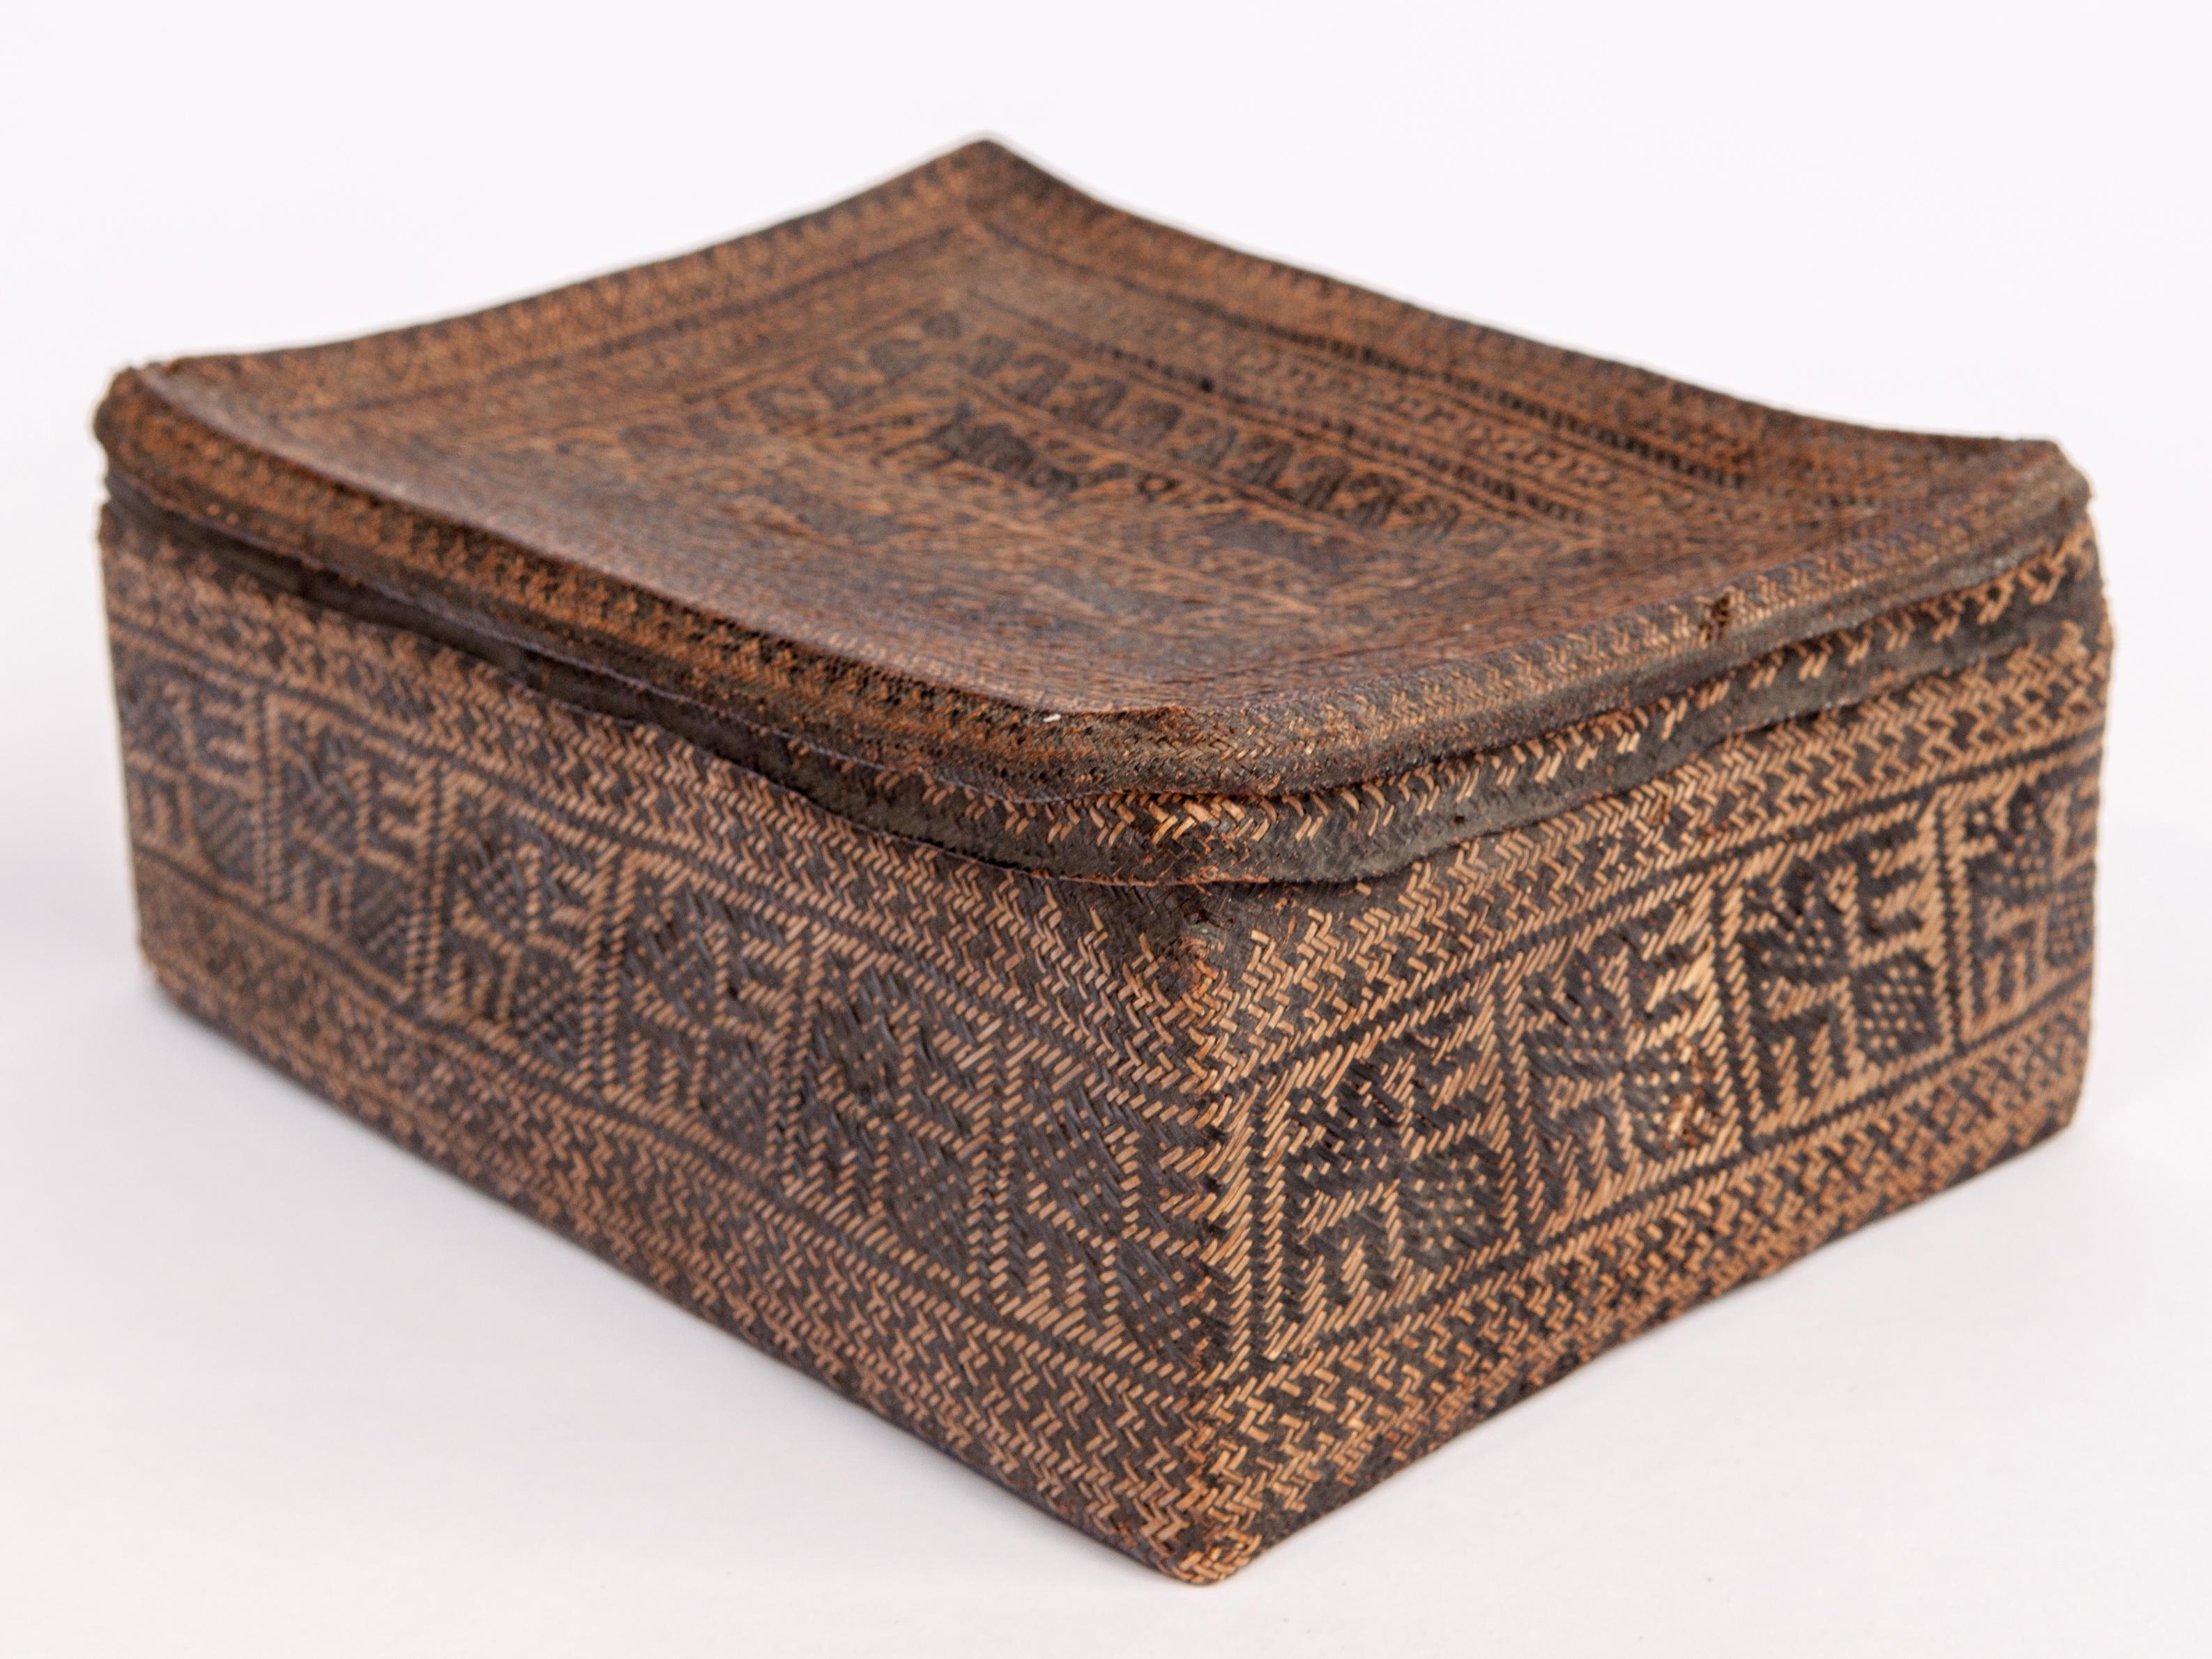 Indonesian Betel Basket with Woven Design, Lampung, Sumatra Late 19th to Early 20th Century